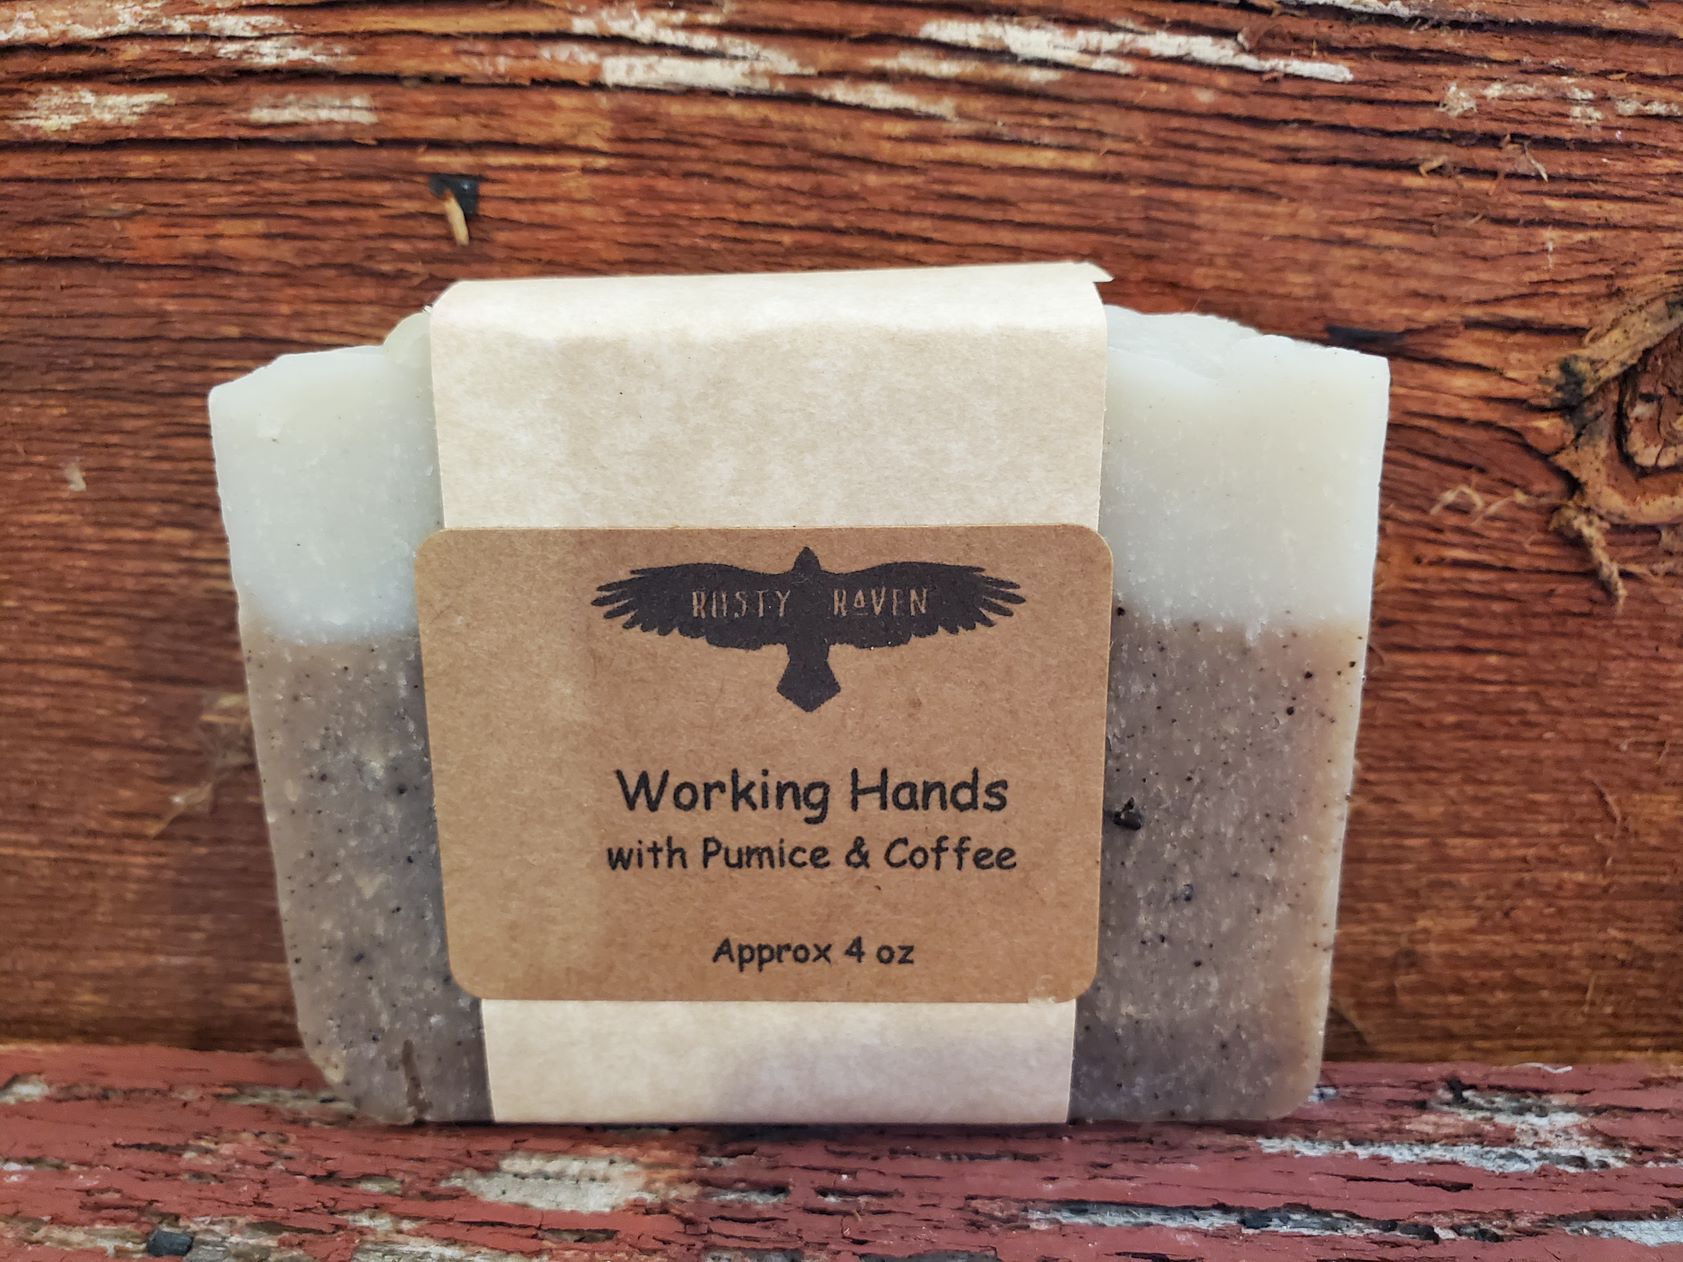 Man of the Rockies Working Hands Soap